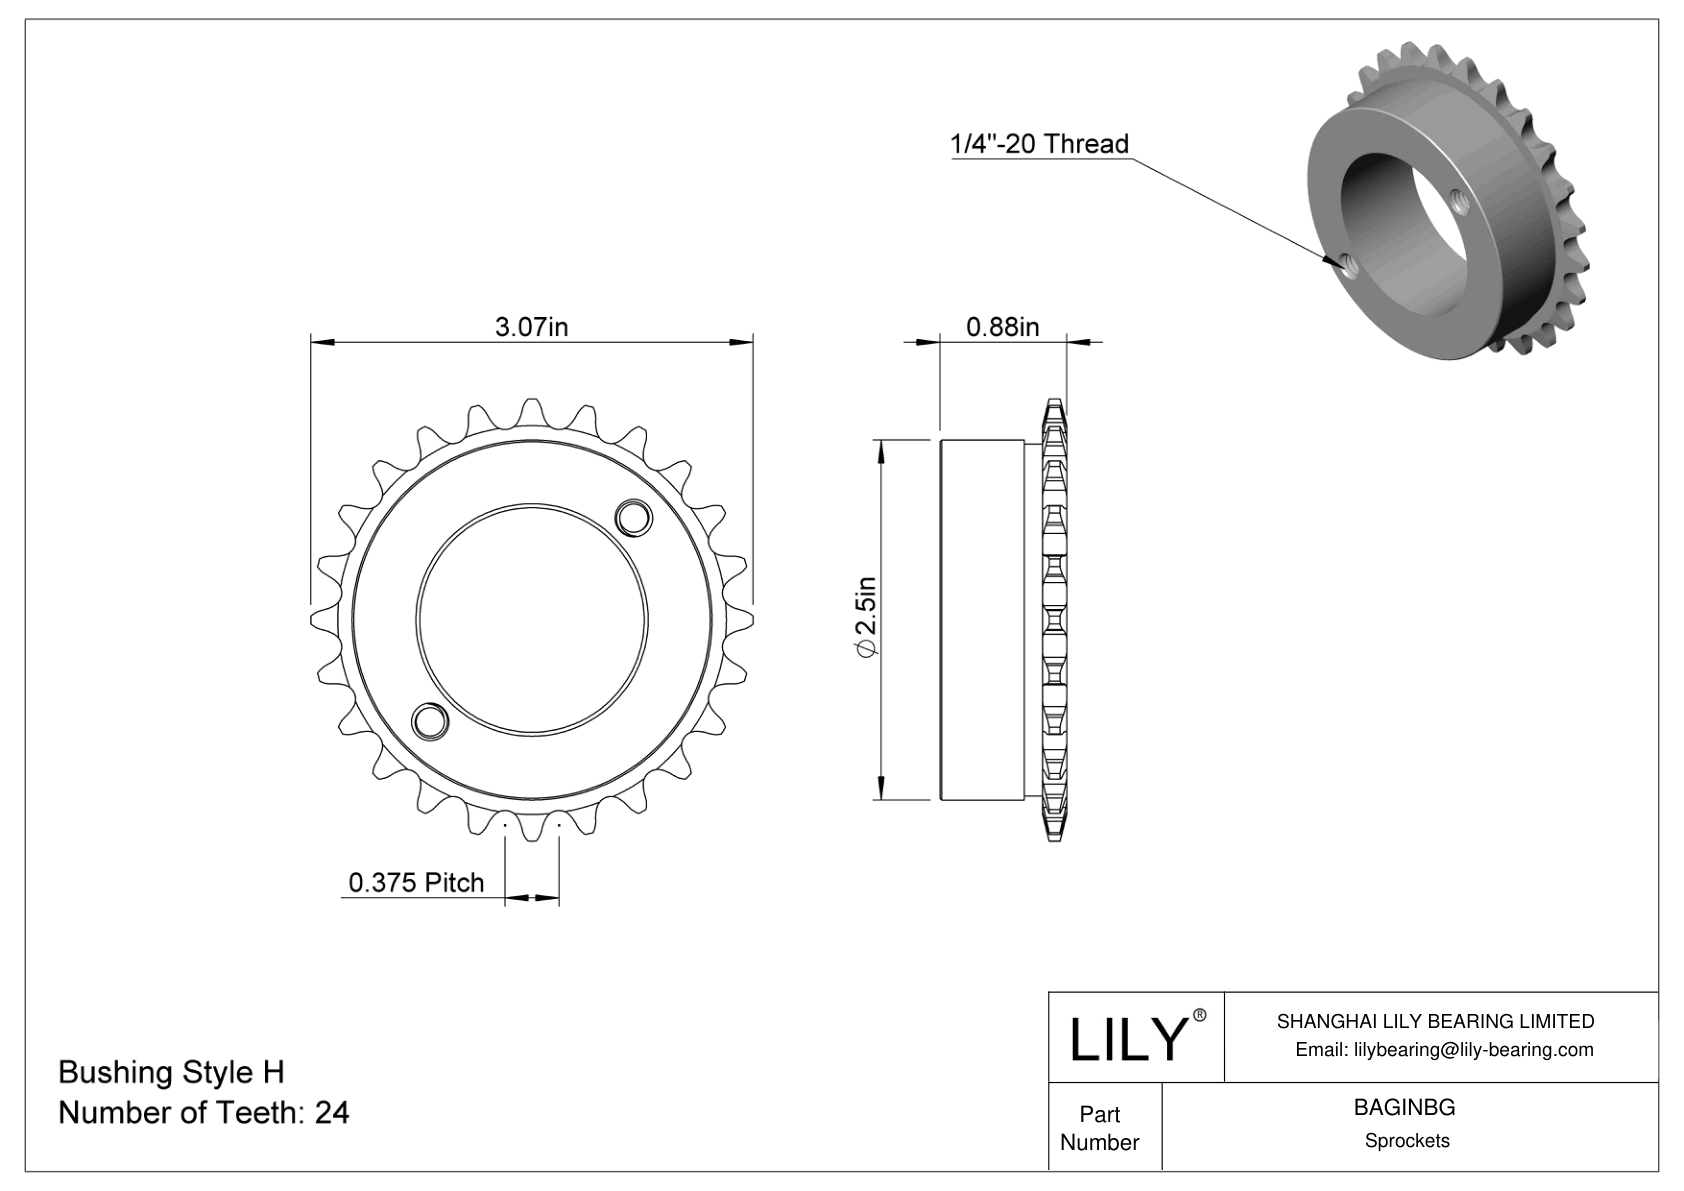 BAGINBG Split-Tapered Bushing-Bore Sprockets for ANSI Roller Chain cad drawing